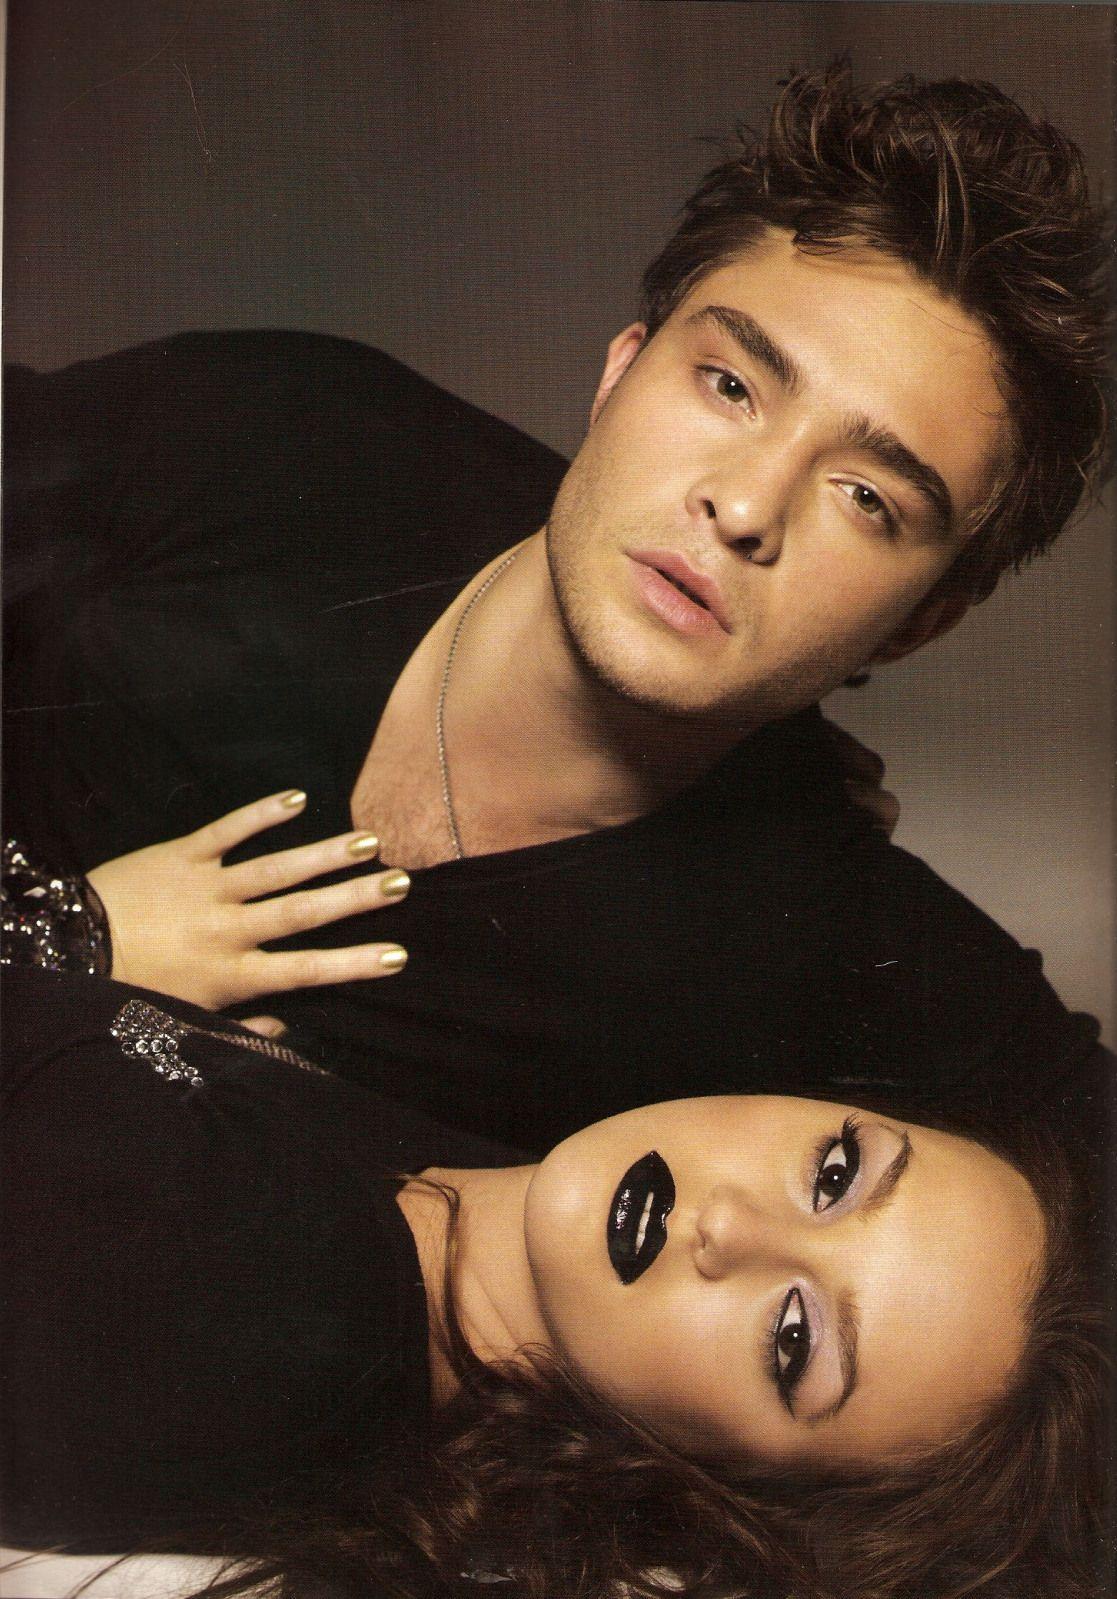 Ed Westwick Wallpaper High Quality